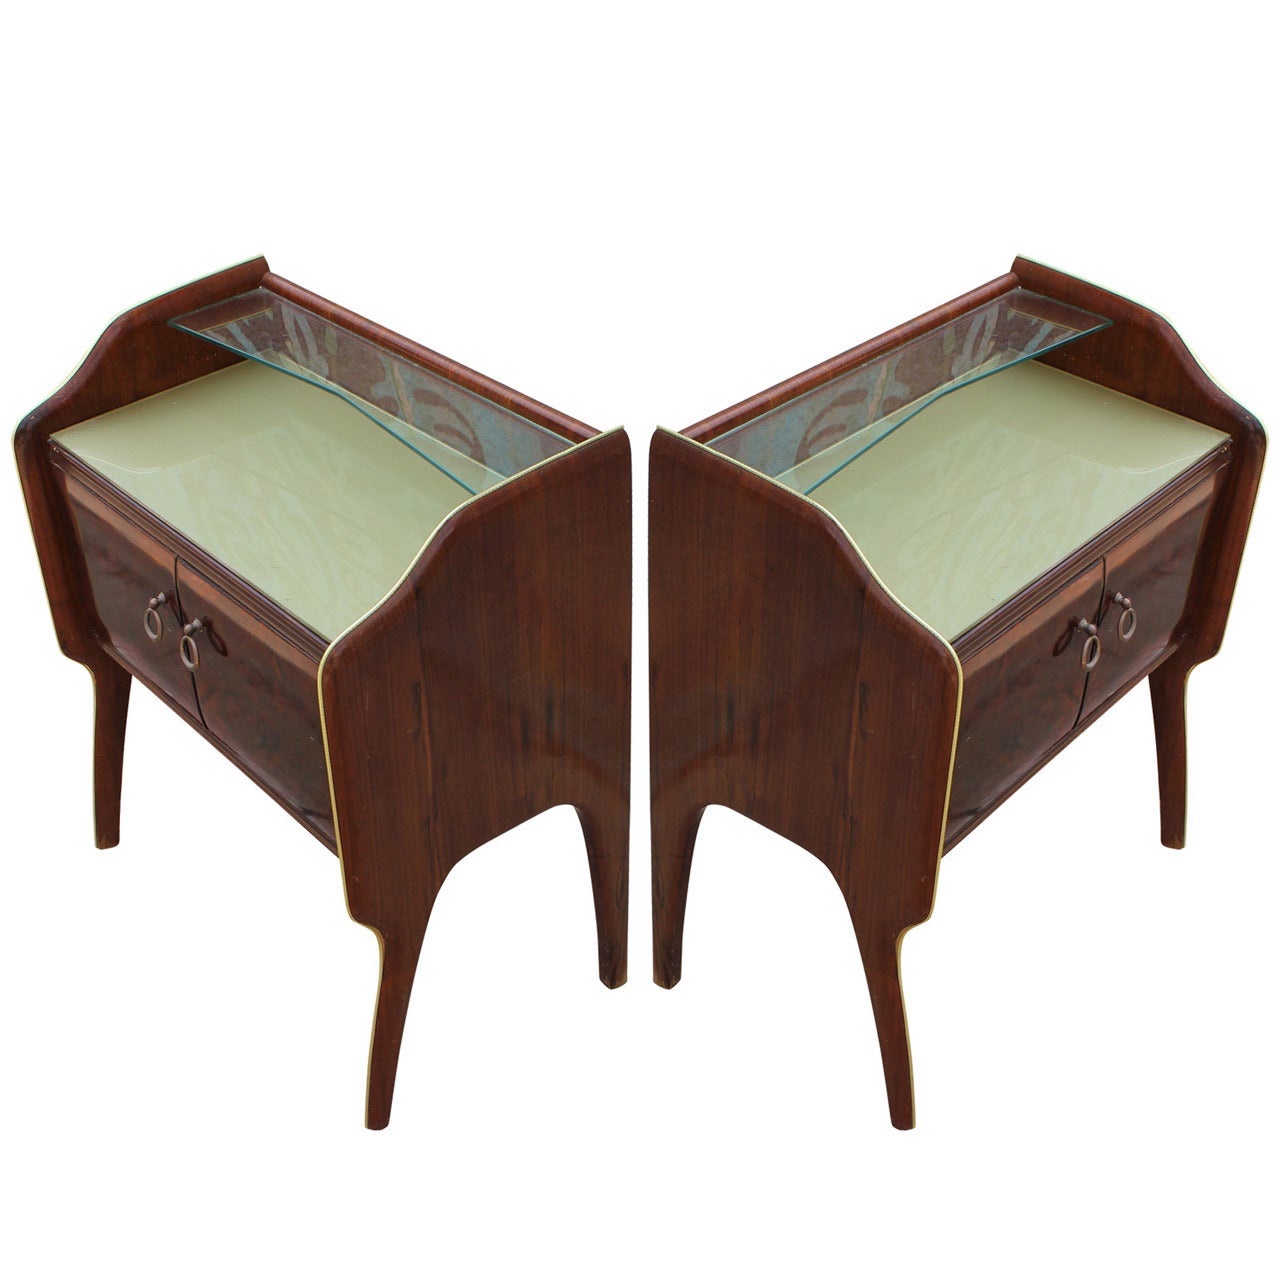 Stunning Pair of Italian Rosewood Nightstands with Gold Colored Glass